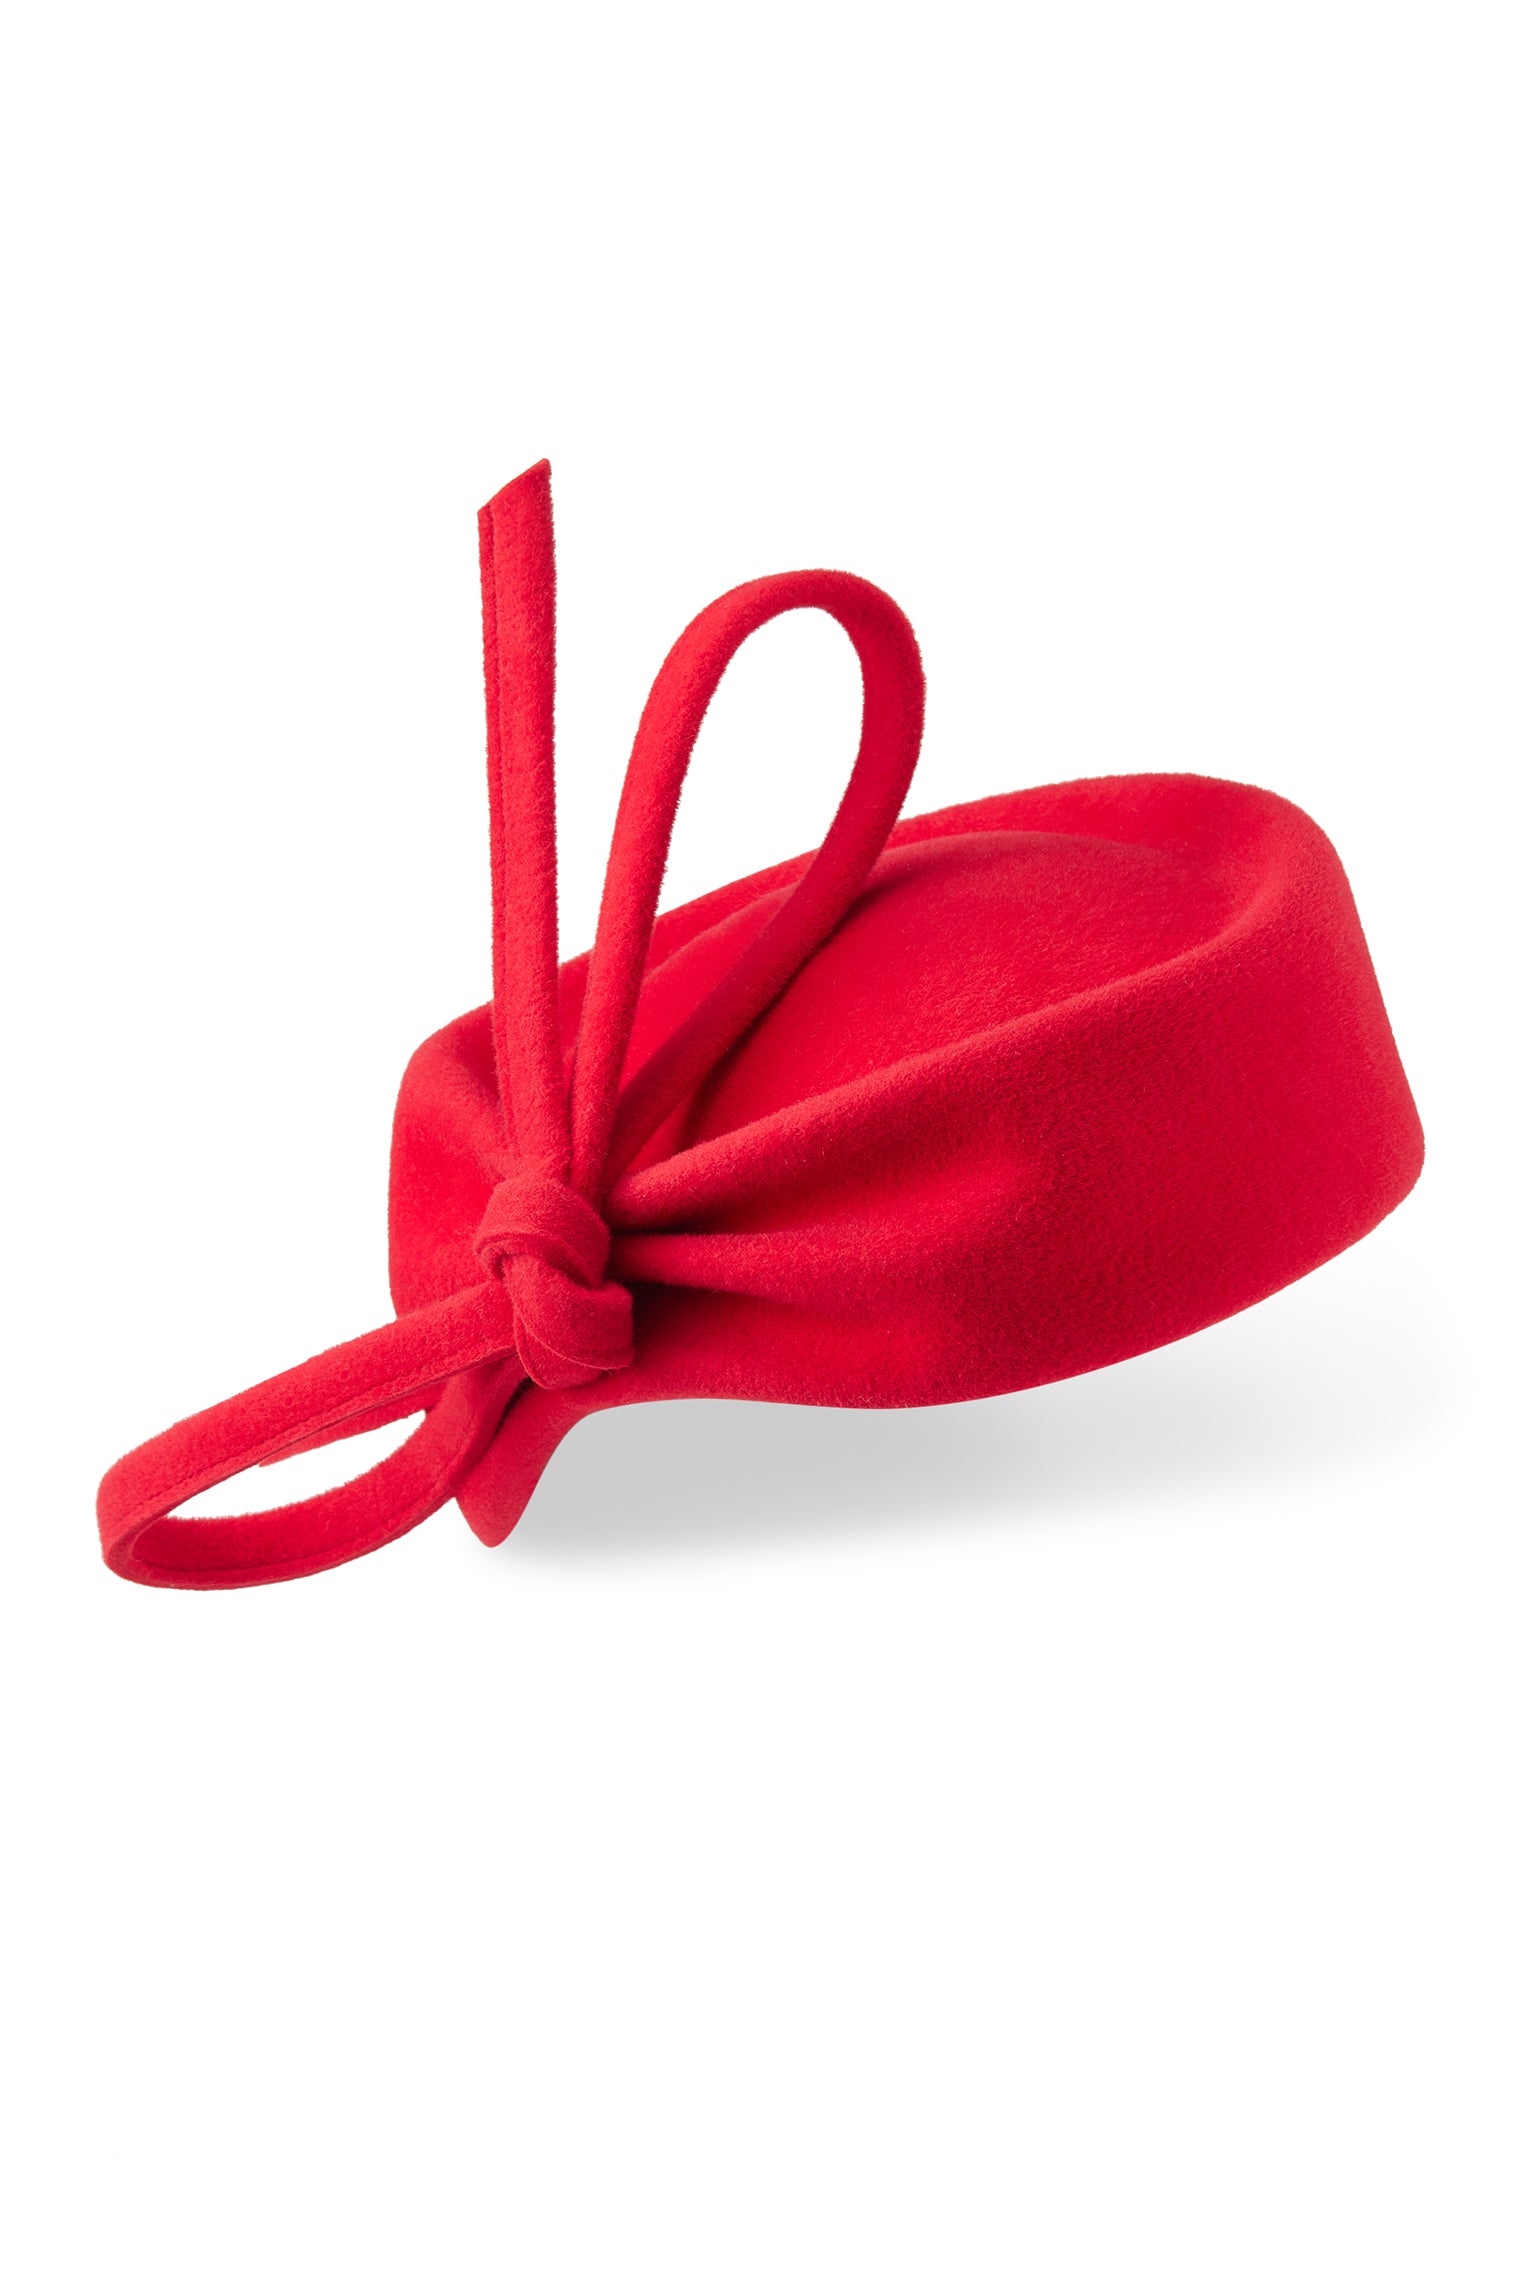 Mayfair Red Pillbox Hat - Lock Couture by Awon Golding - Lock & Co. Hatters London UK